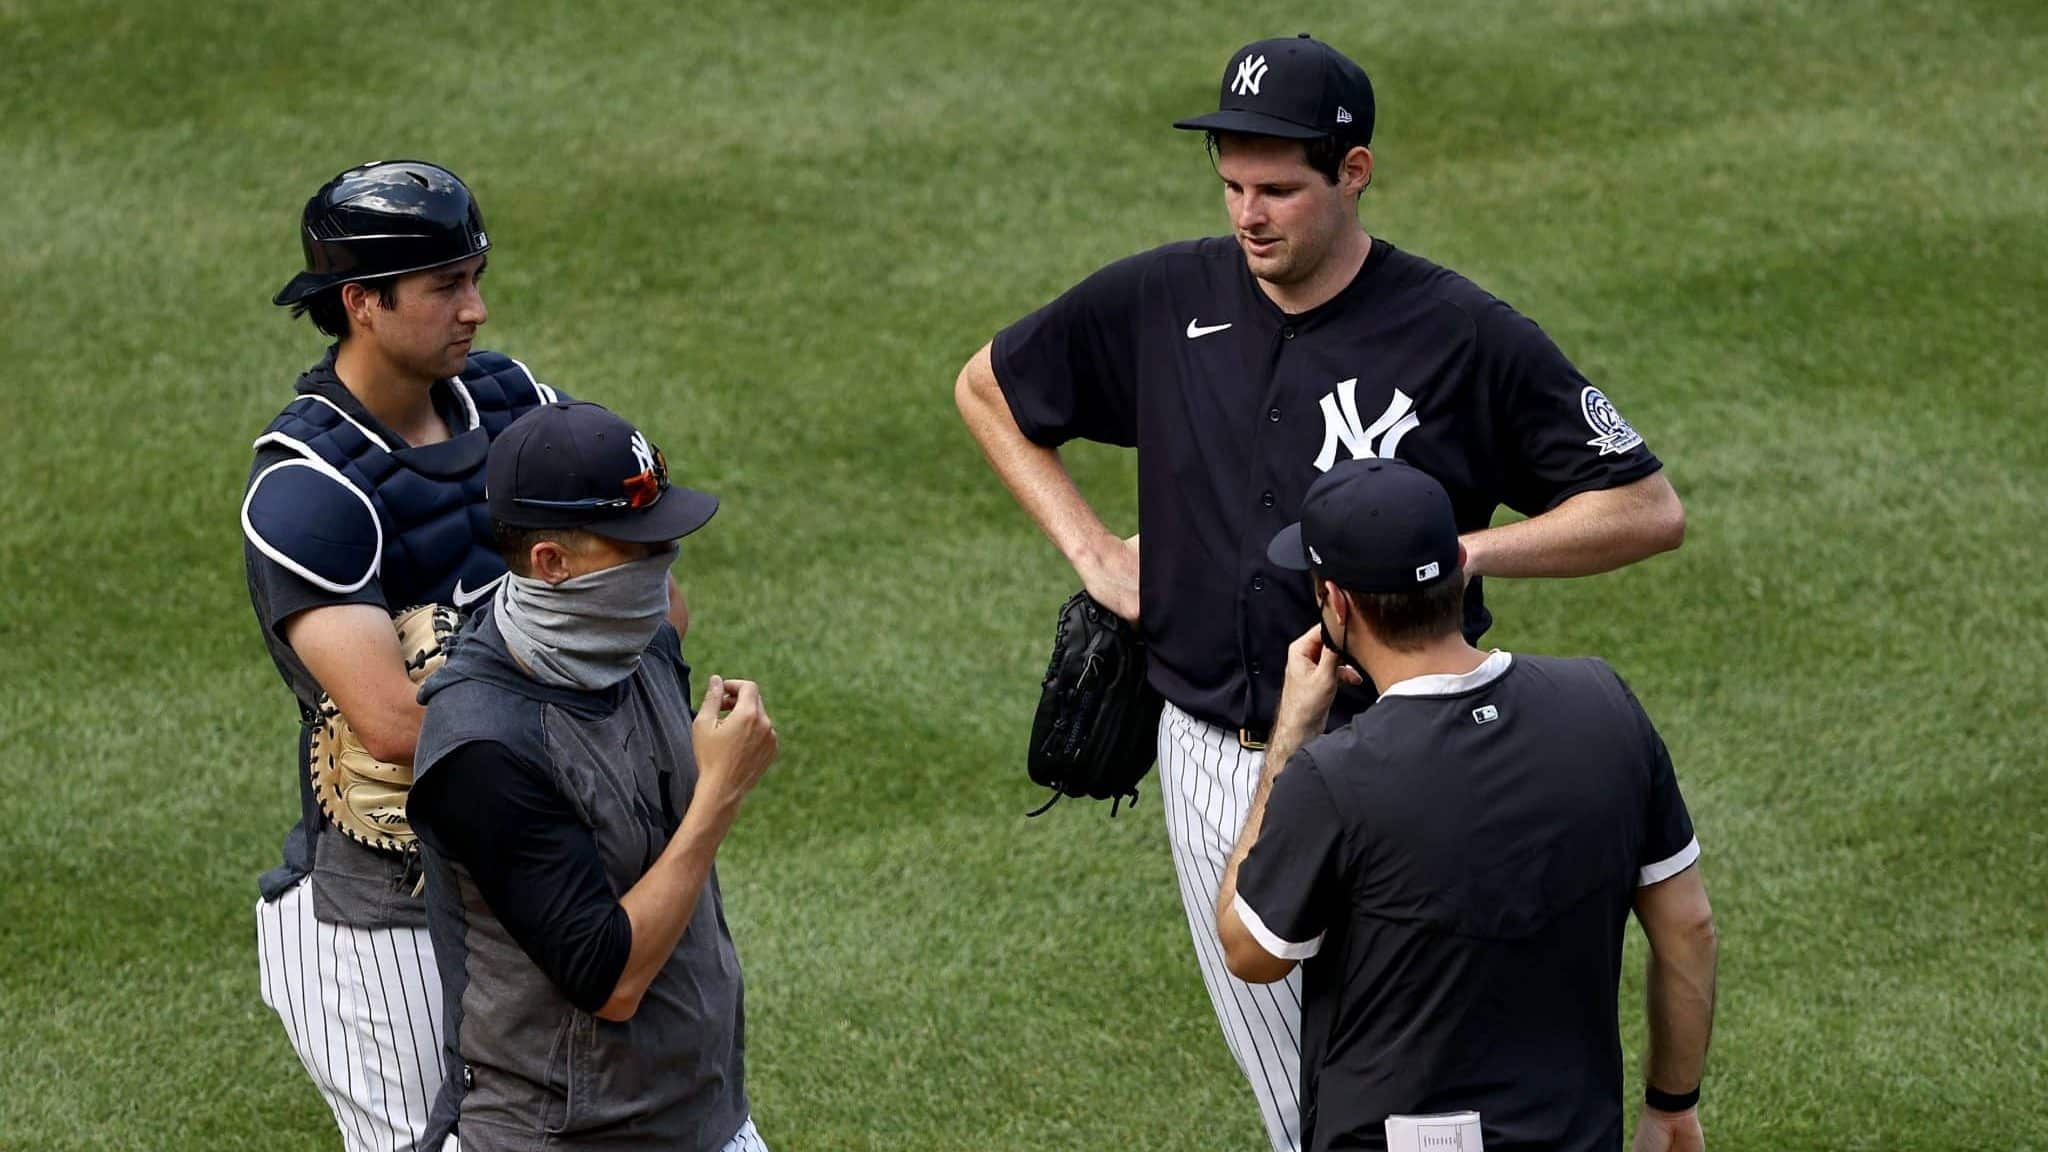 NEW YORK, NEW YORK - JULY 04: Manager Aaron Boone talks with Jordan Montgomery #47 of the New York Yankees during summer workouts at Yankee Stadium on July 04, 2020 in the Bronx borough of New York City.